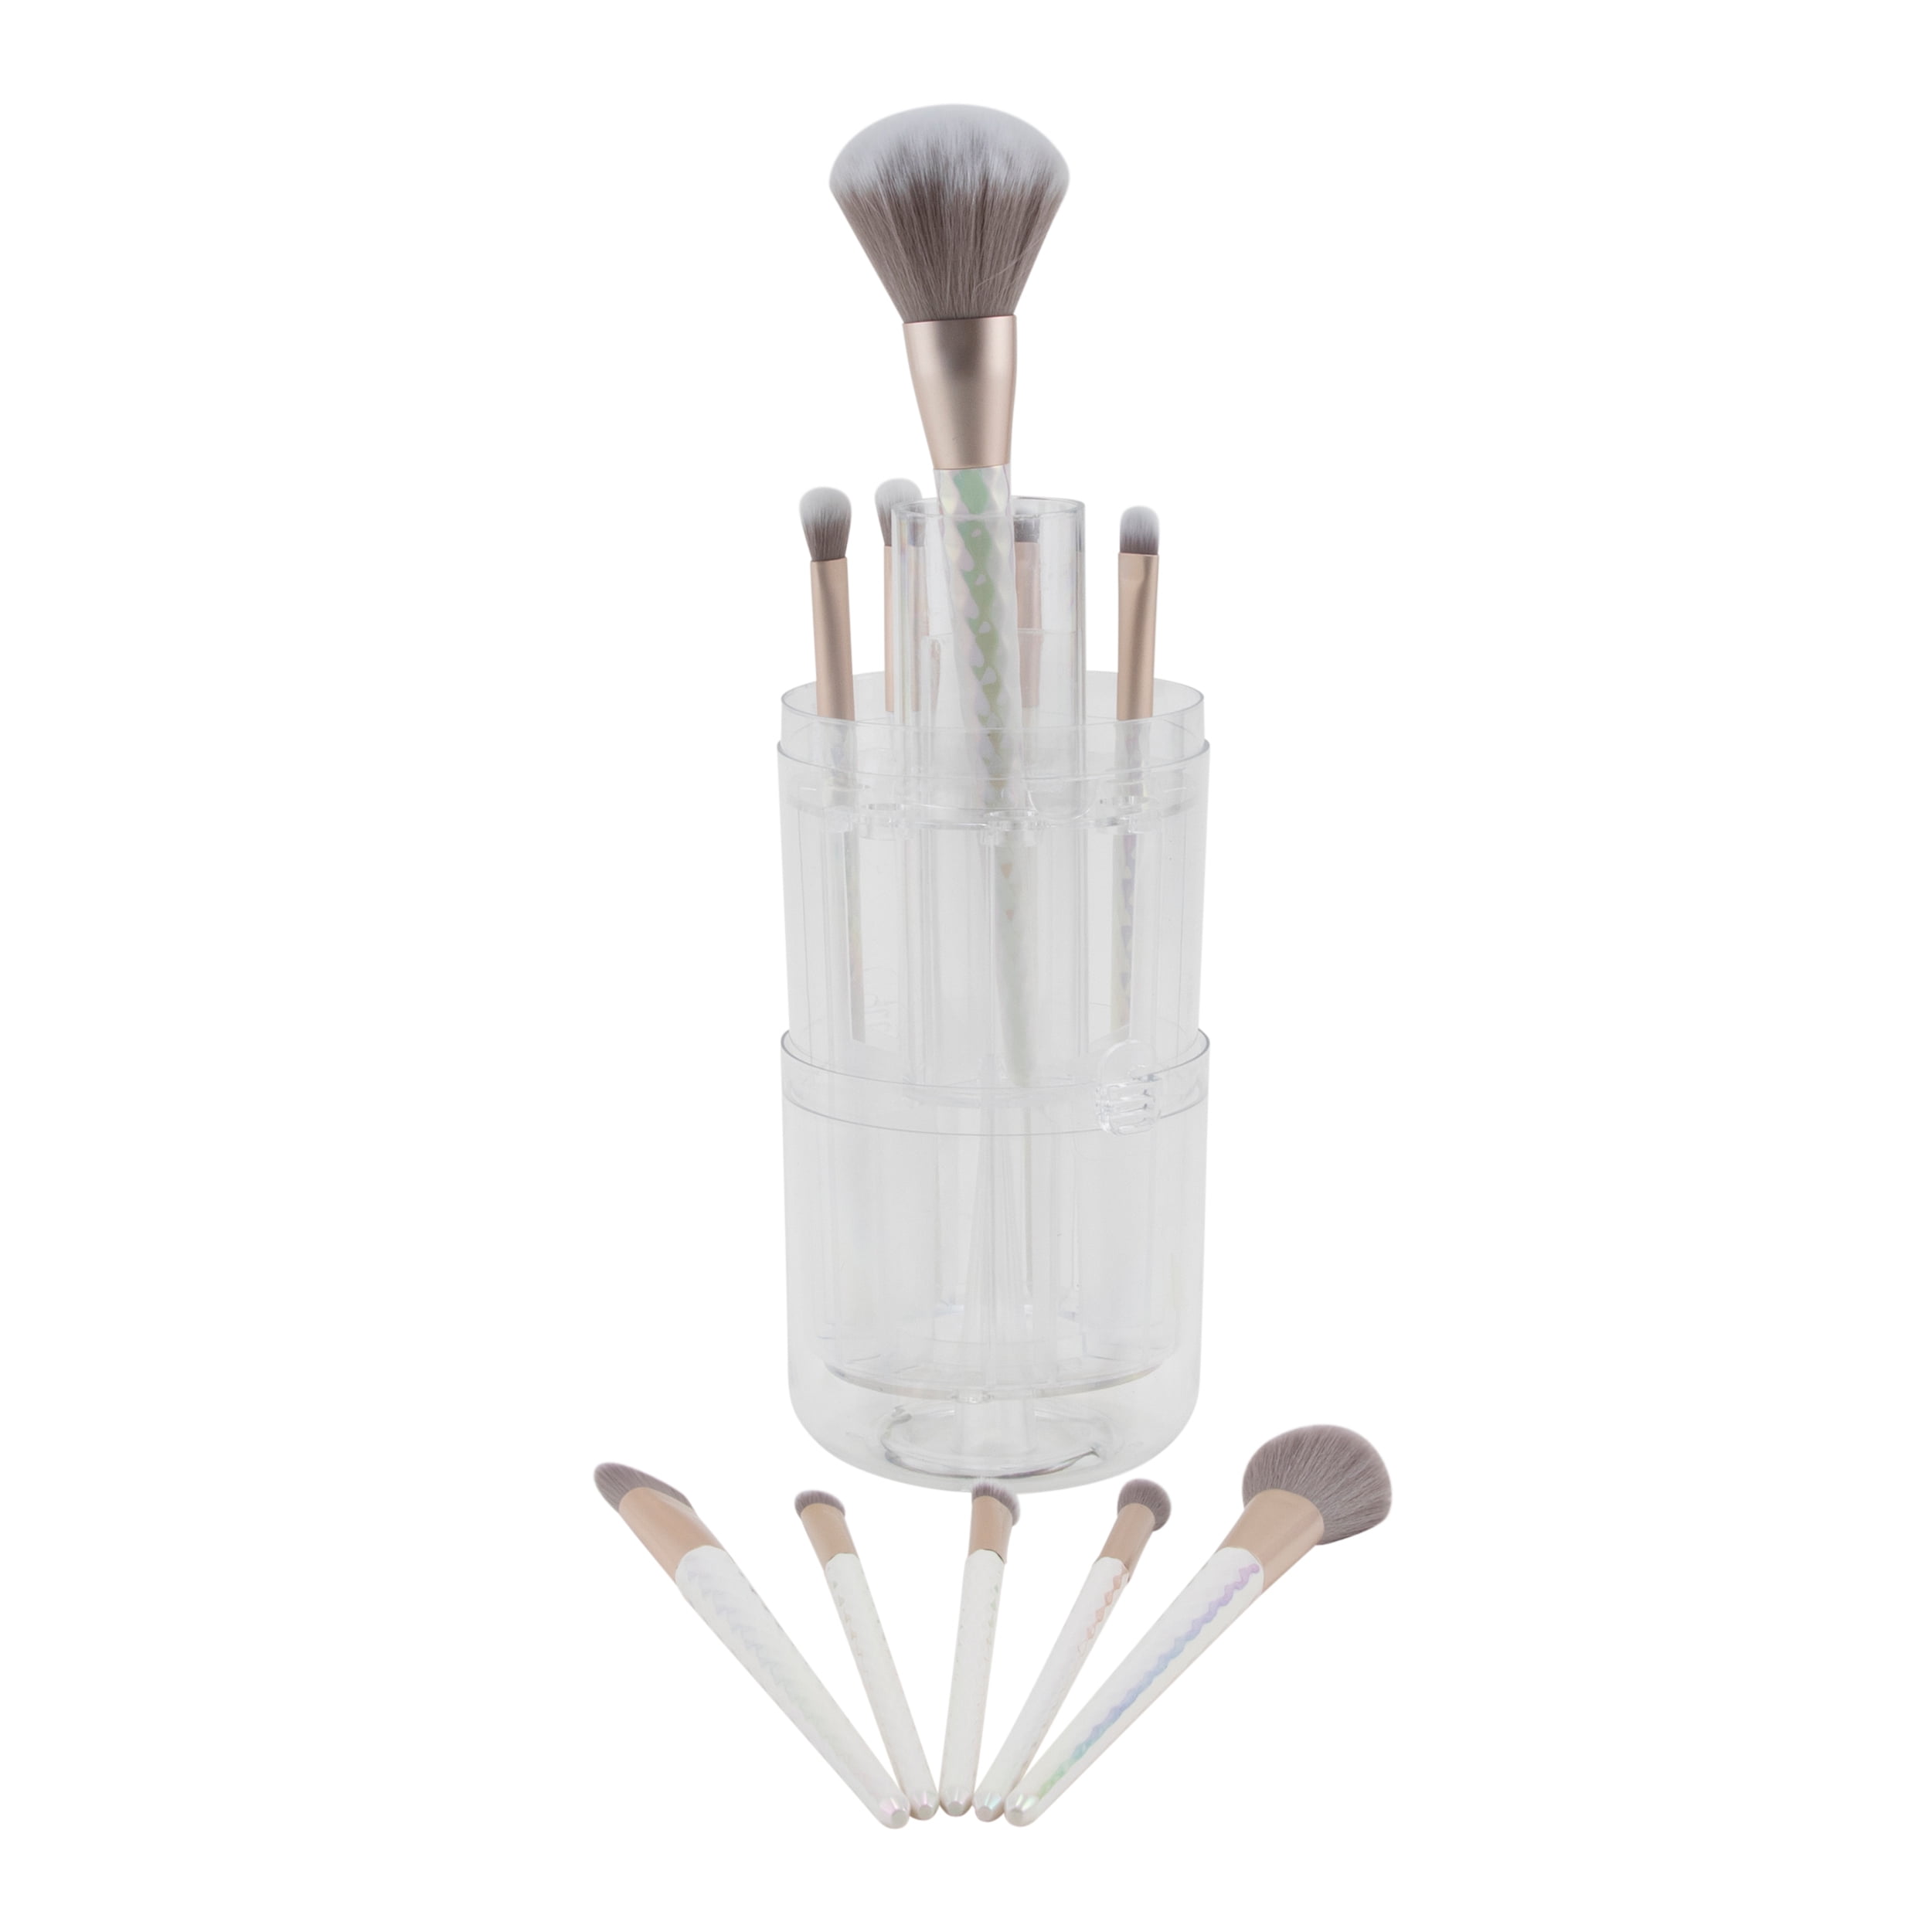 Candie Couture by Margaret Josephs Makeup Brush Set with Holder, 10 Piece